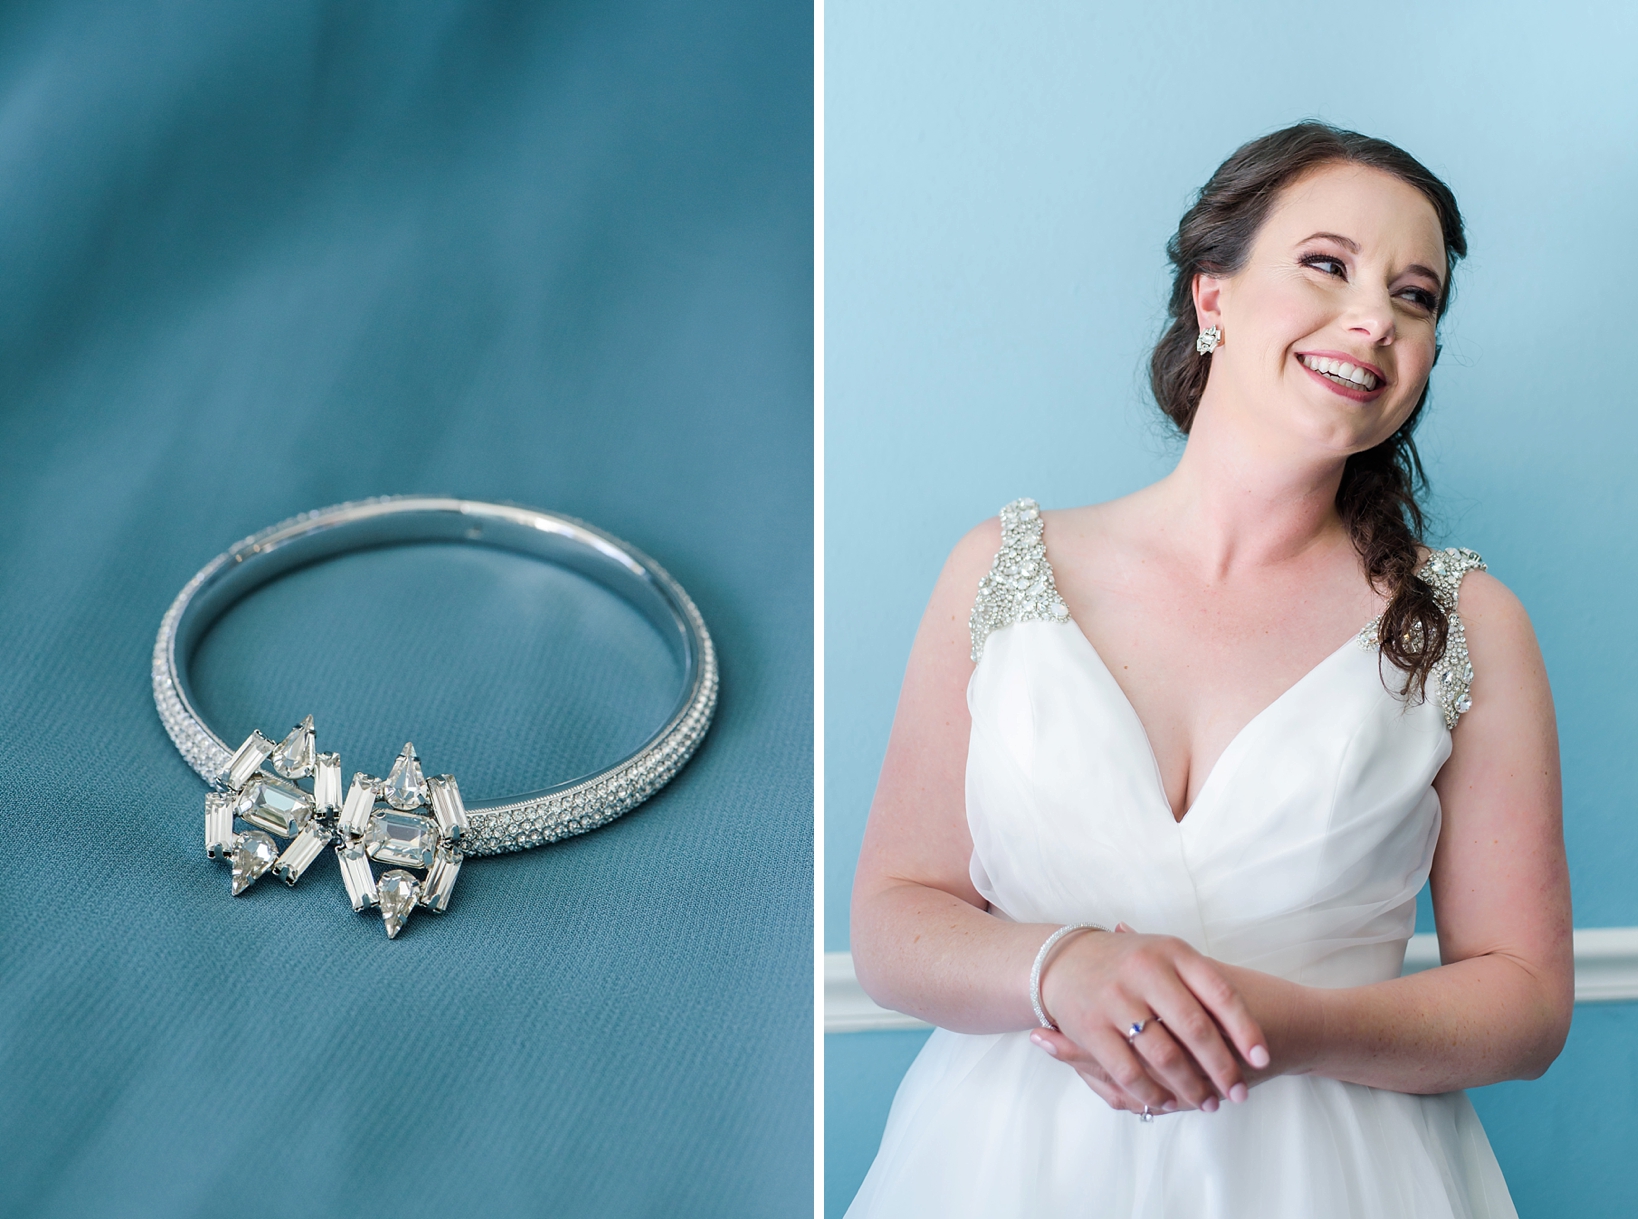 The brides diamond jewelry and the bride laughing against a light blue background